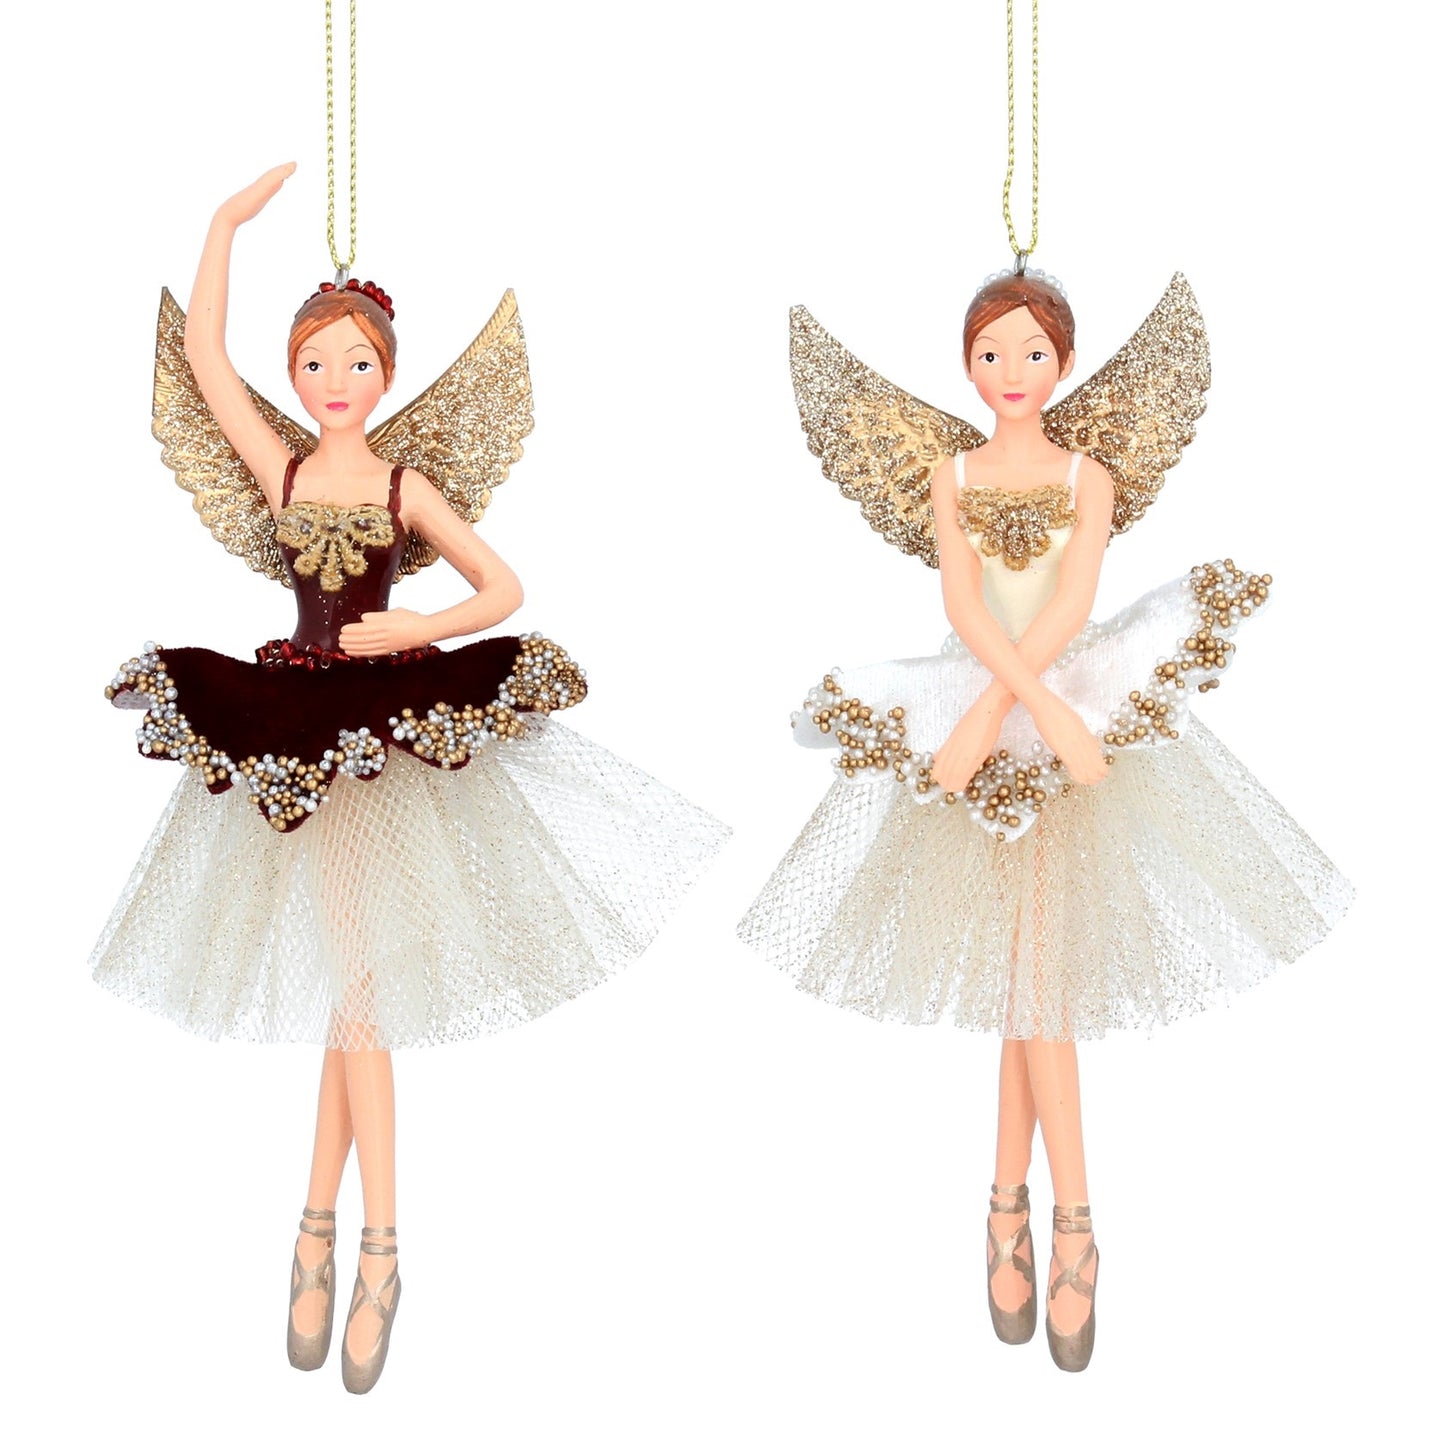 Gisela Graham Luxury Cream Velvet Fairy Large Christmas Decorations 16 cm  Browse our beautiful range of luxury Christmas tree decorations, baubles & ornaments for your tree this Christmas.  Add style to your Christmas tree with these elegant Christmas Luxury Velvet Fairy decorated with cream and golden fabric.